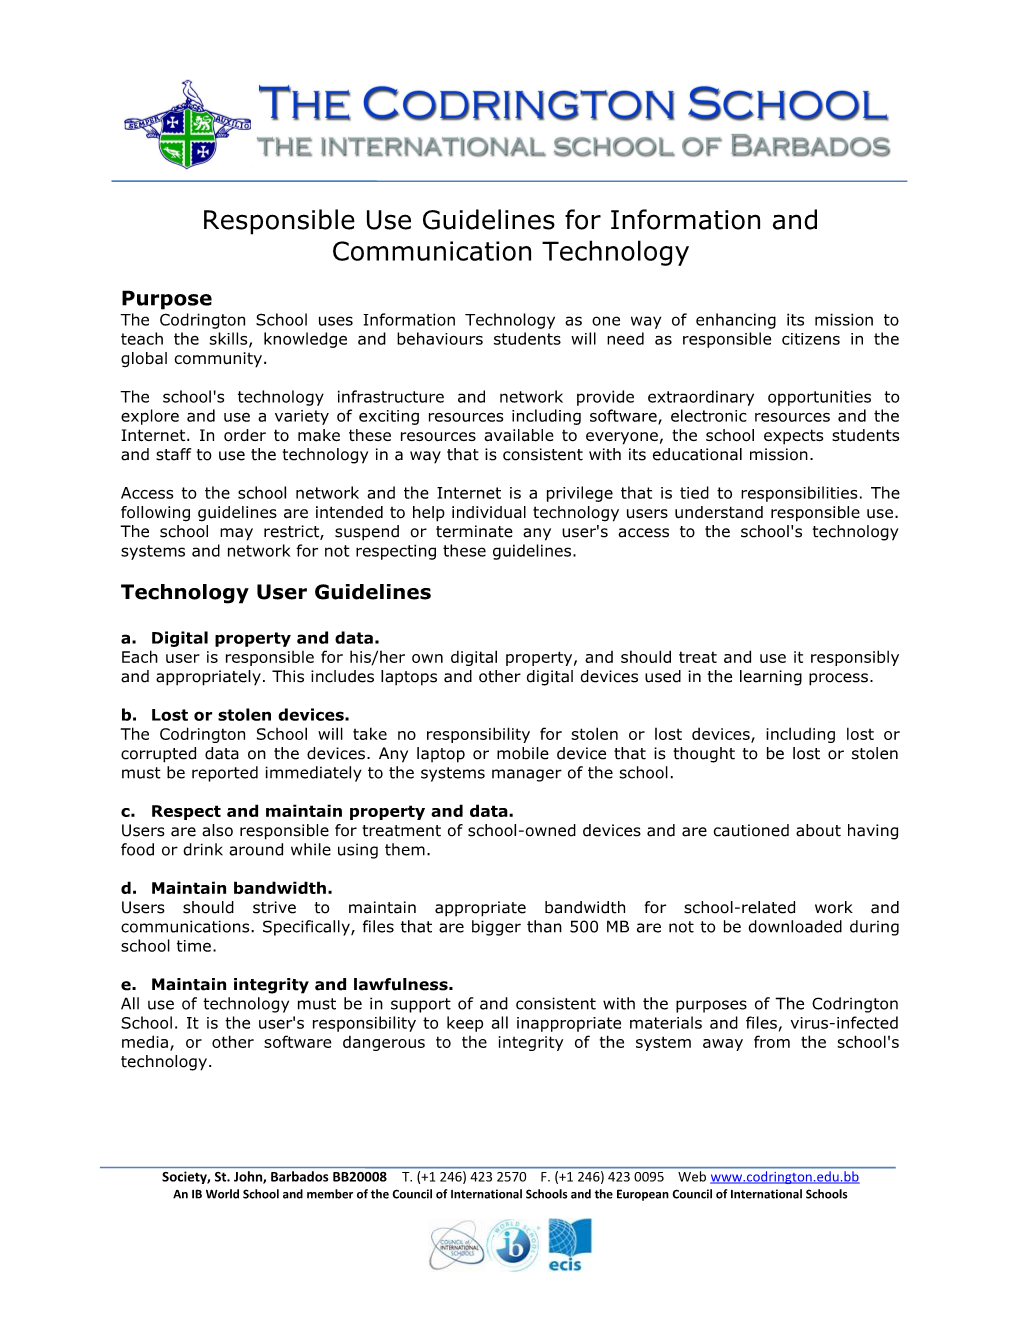 Responsible Use Guidelines for Information and Communication Technology